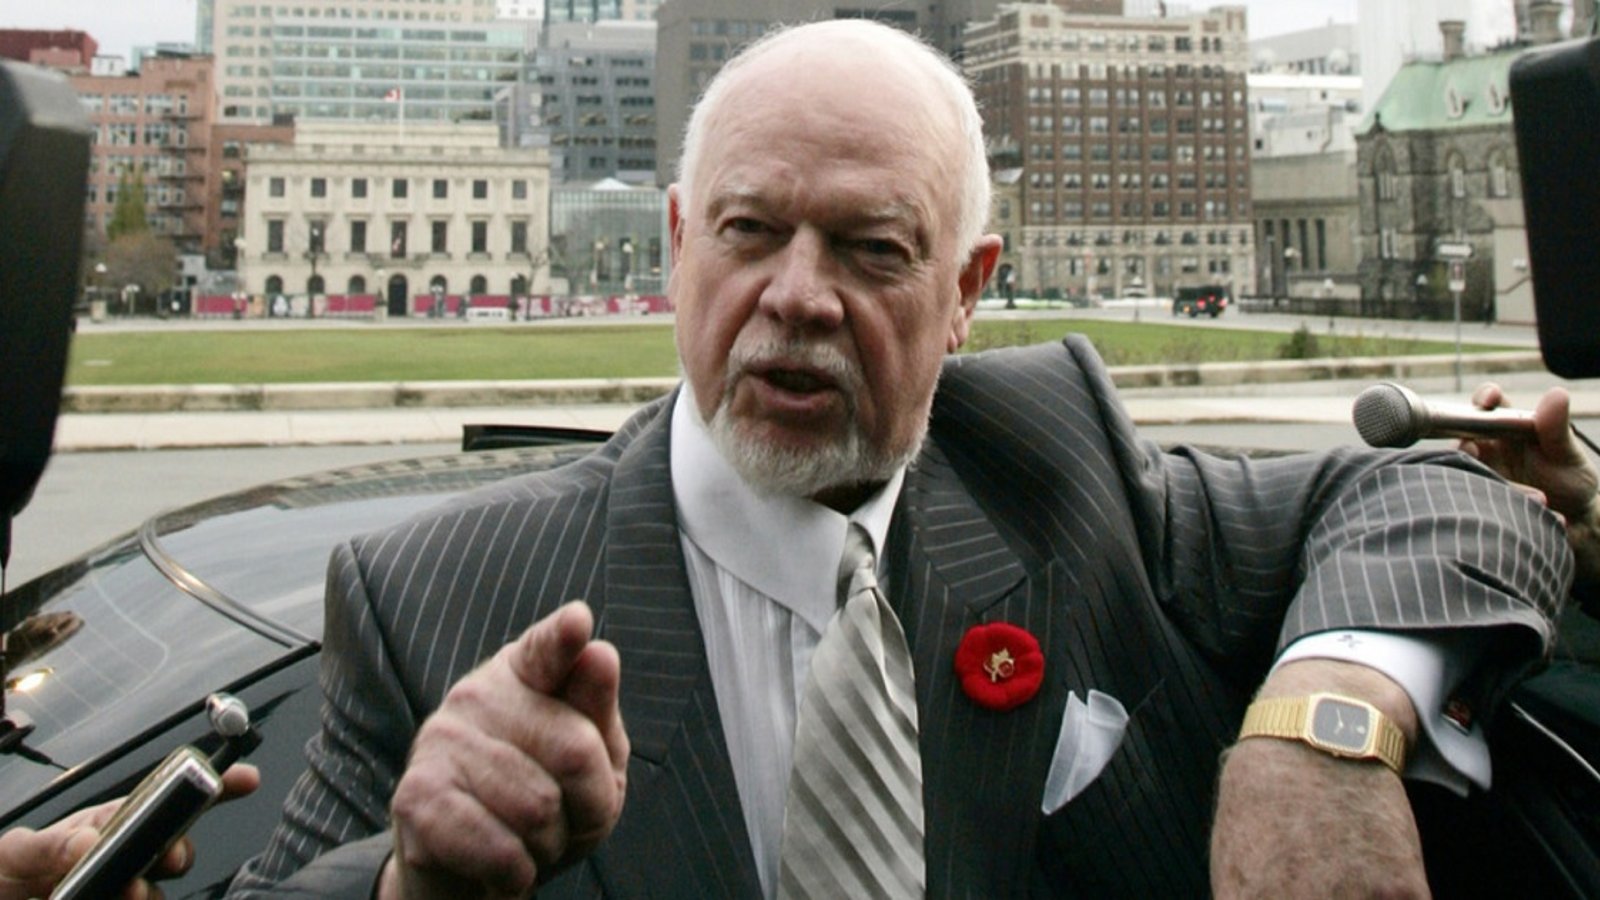 Don Cherry: “They played last night like they wanted the coach fired.”